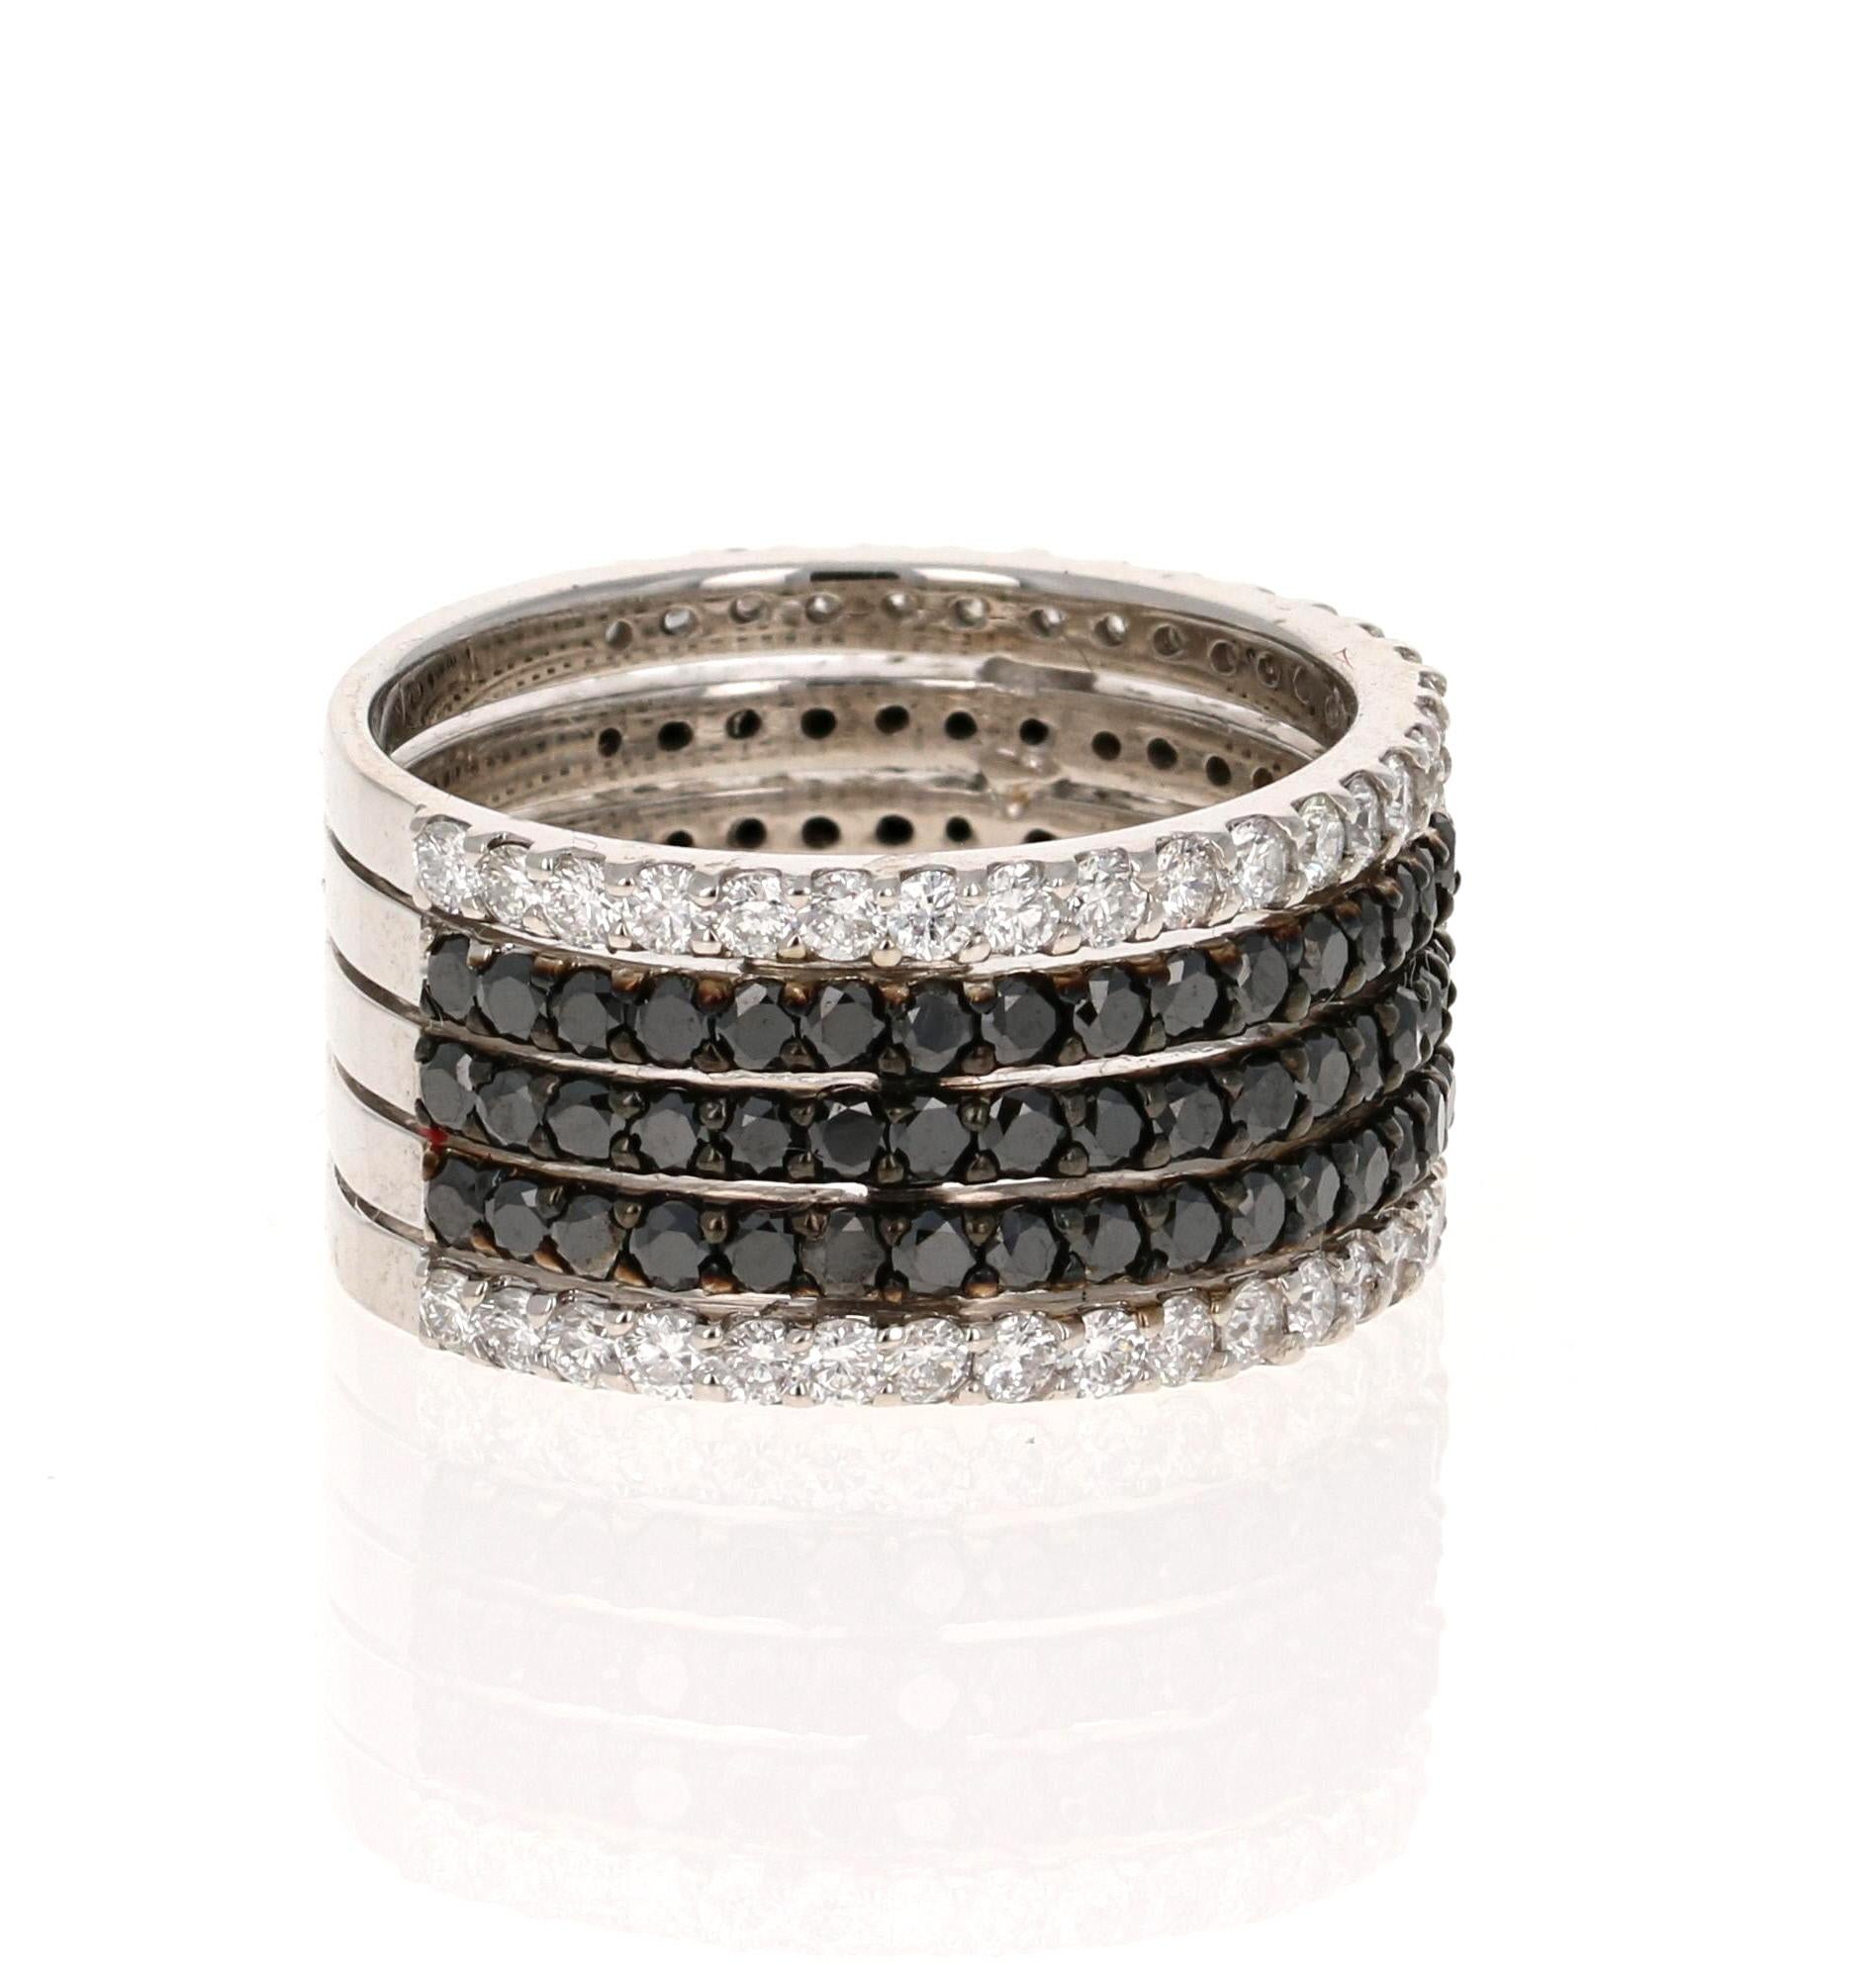 Simple yet Elegant.....This classic design is going to elevate your accessory wardrobe!   This ring gives the illusion that you are wearing 5 separate rings but is actually just 1 ring.  There are a total of 90 Black Round Cut Diamonds that weigh